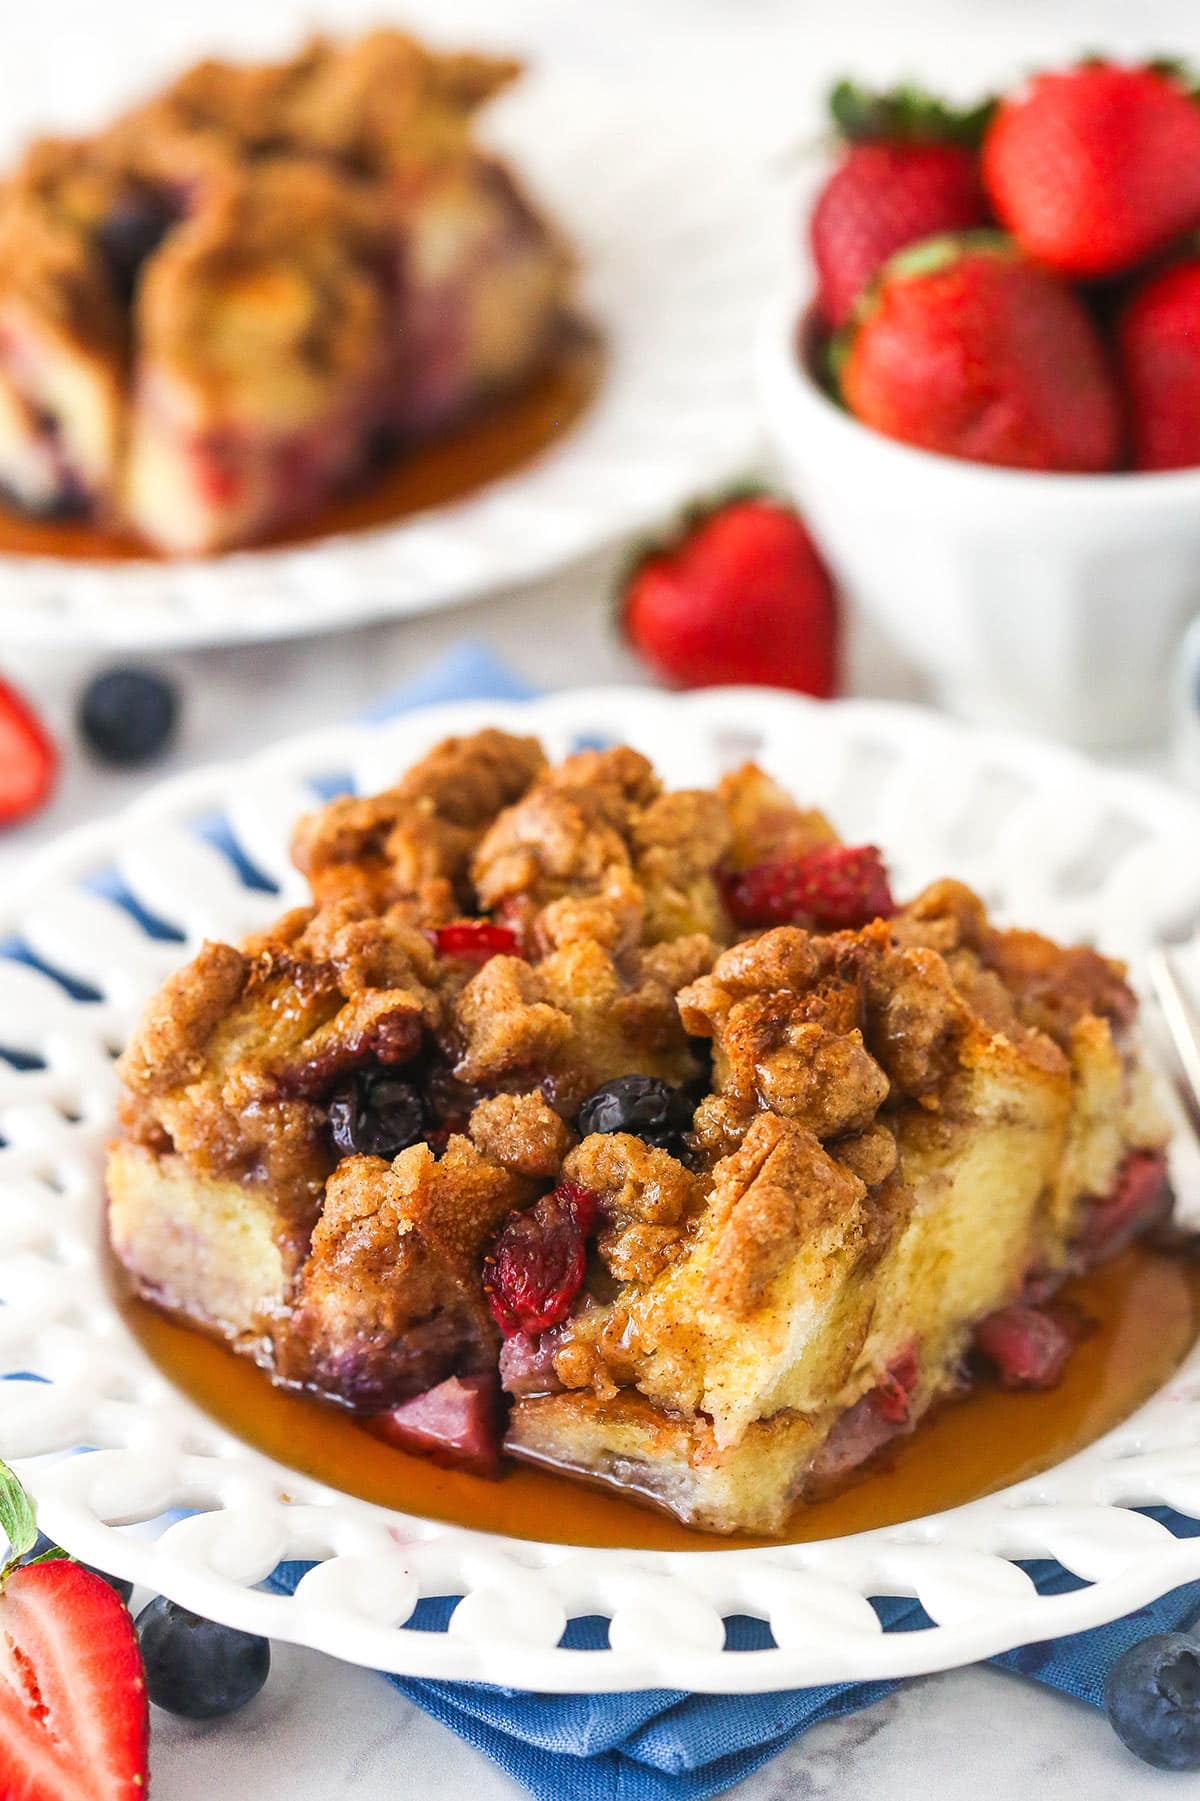 A slice of berry French toast casserole on a plate.